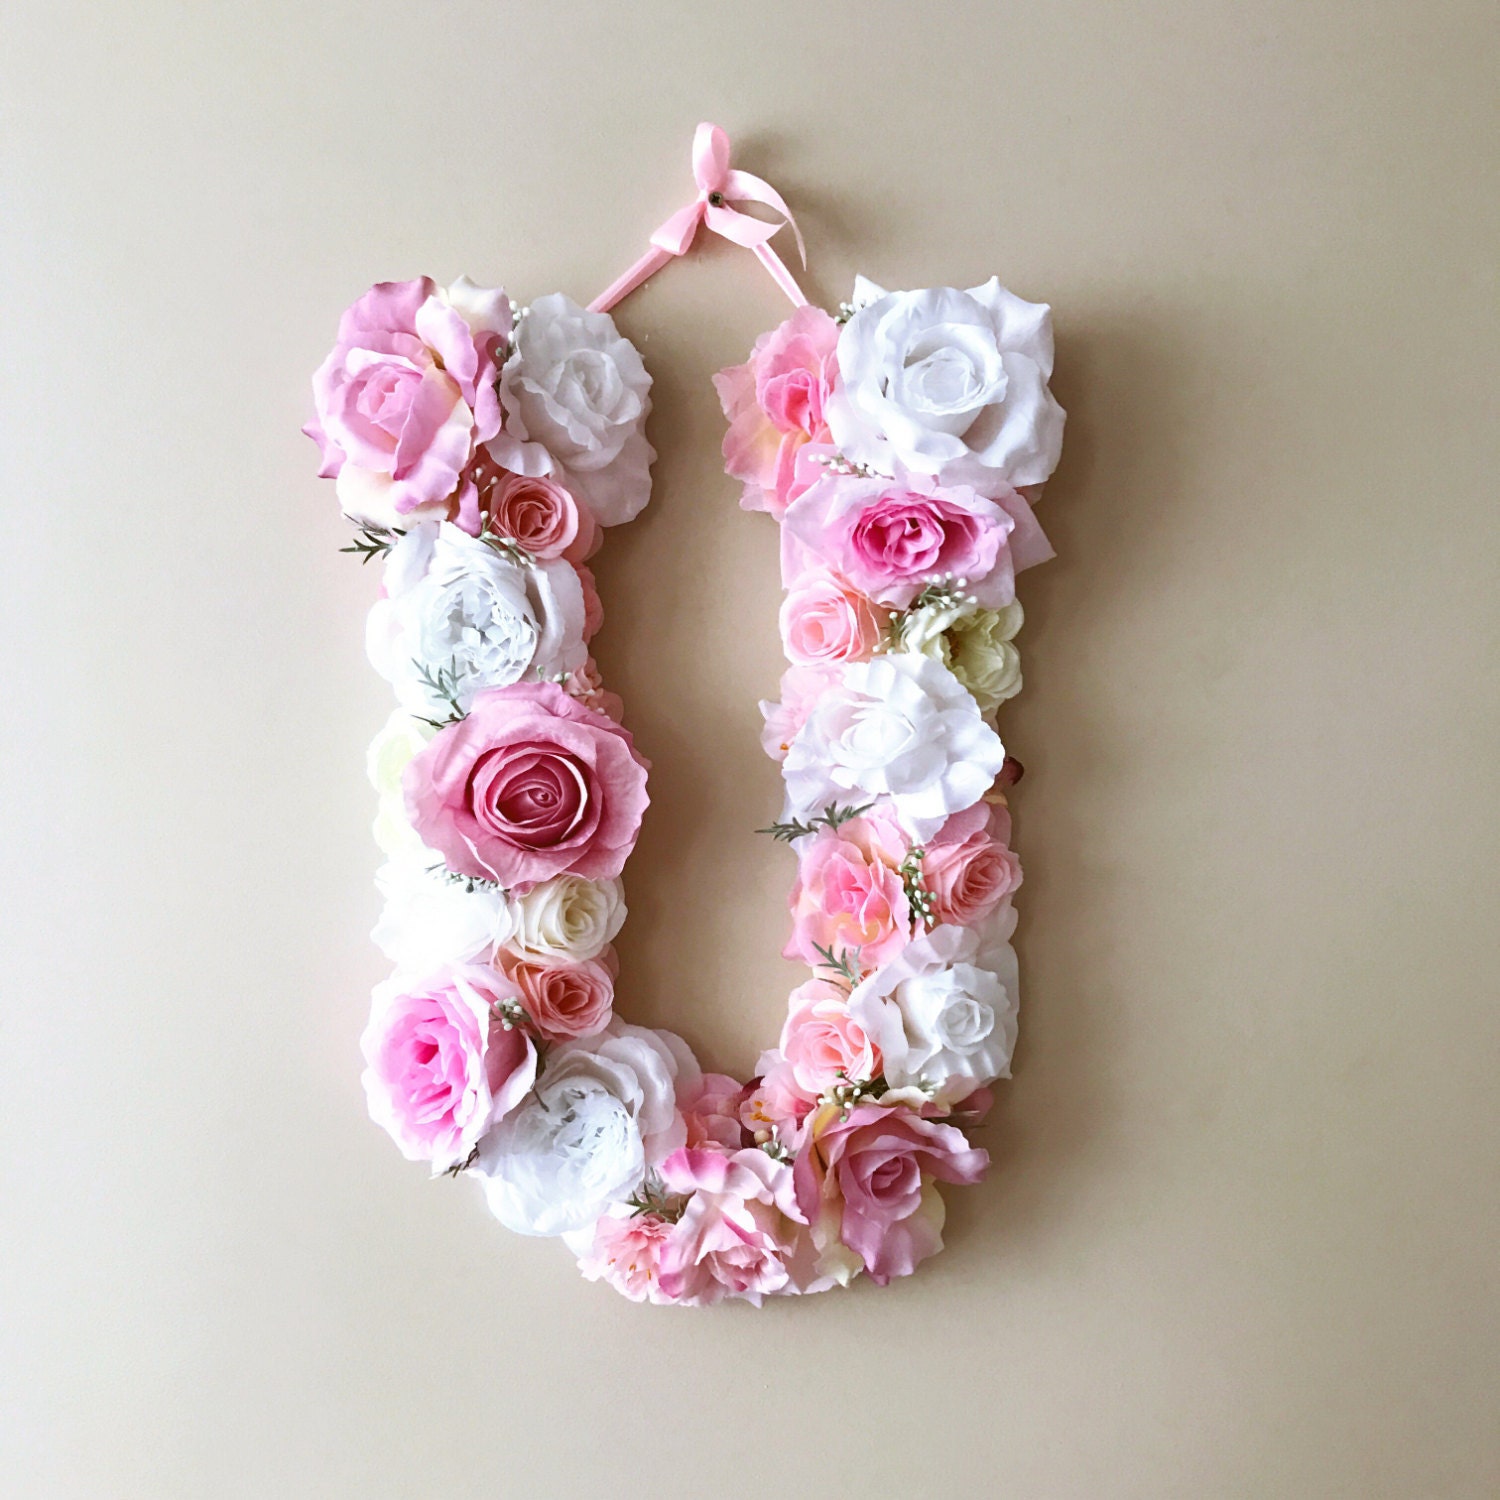 Flower Letters, 18'' Floral Letters, Vintage wedding decor / Personalized nursery wall decor, Baby shower, Photography Prop, Wall art